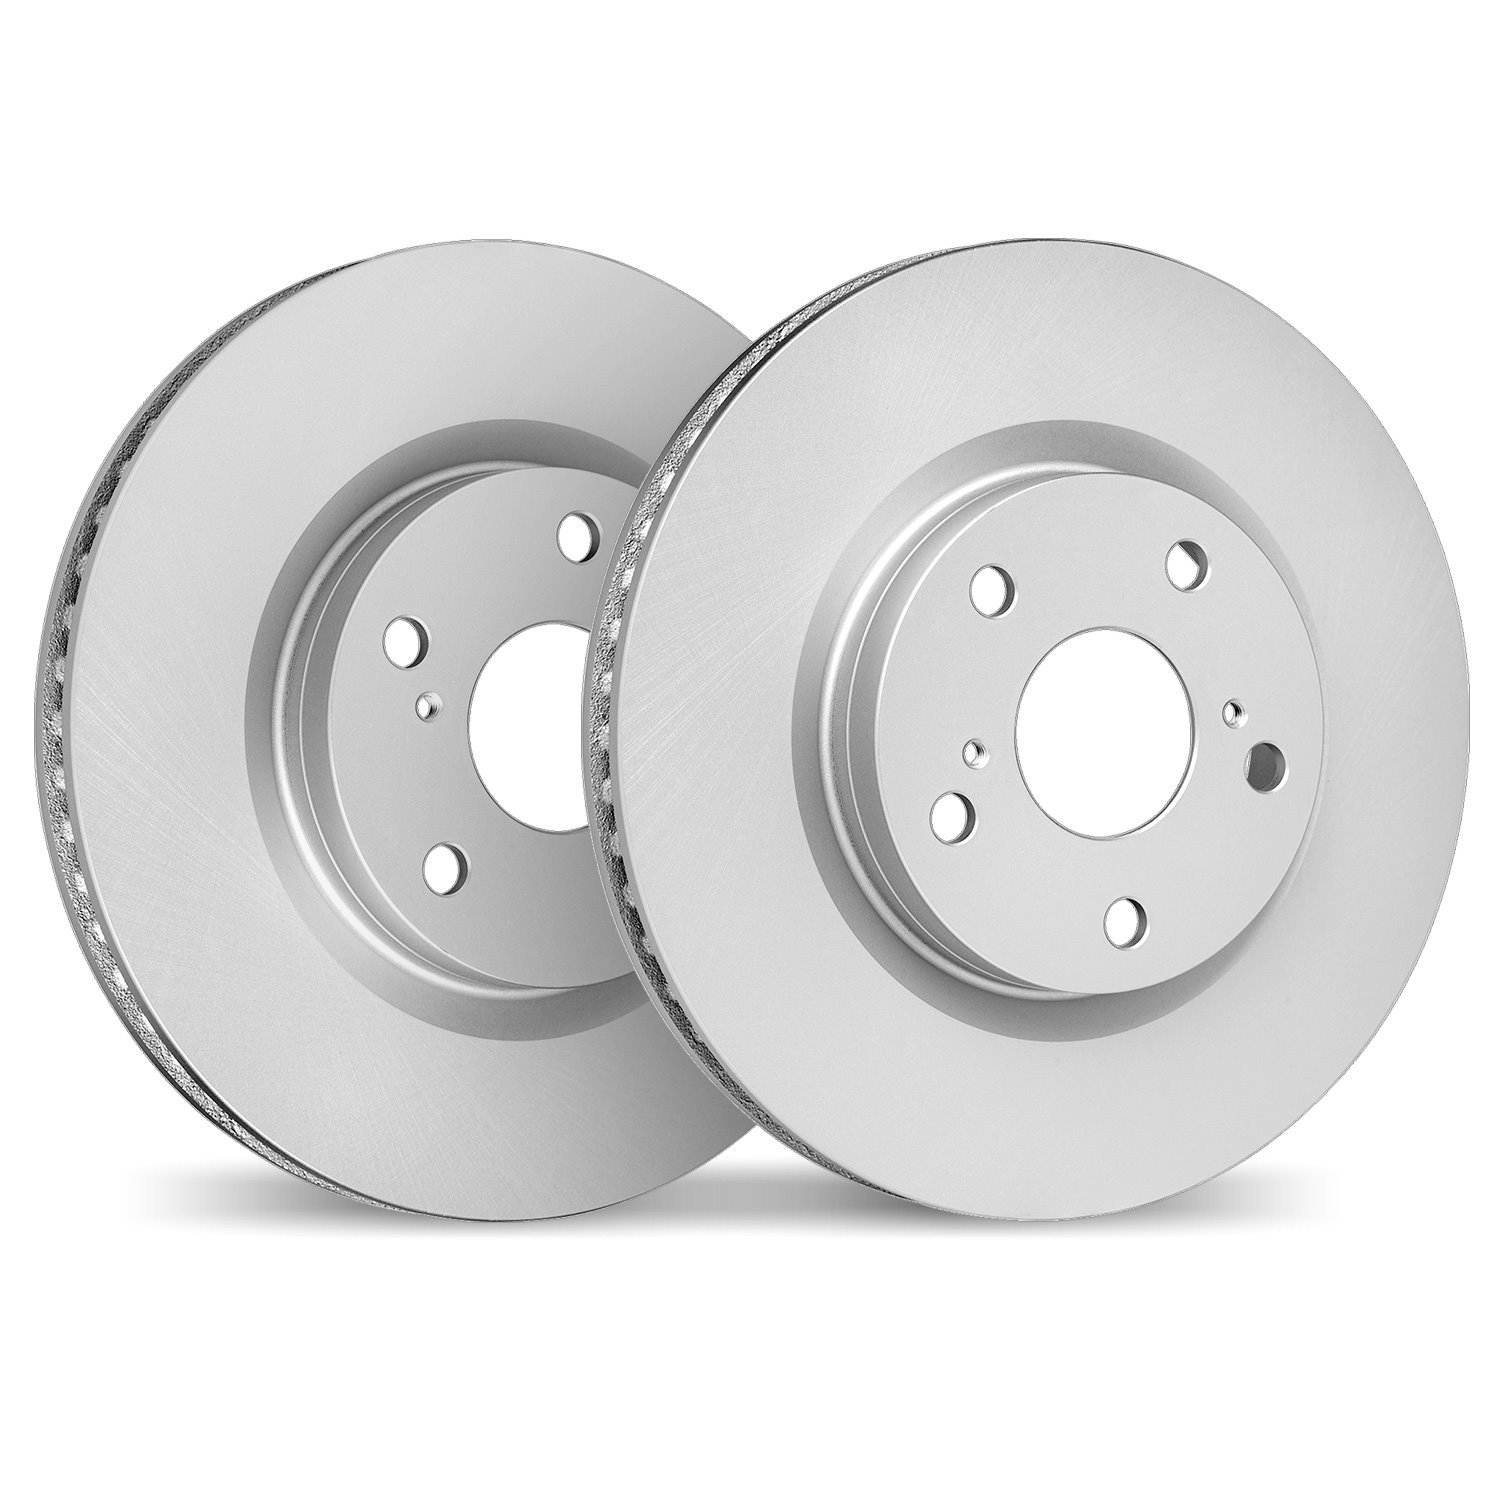 4002-54186 Geospec Brake Rotors, Fits Select Ford/Lincoln/Mercury/Mazda, Position: Front